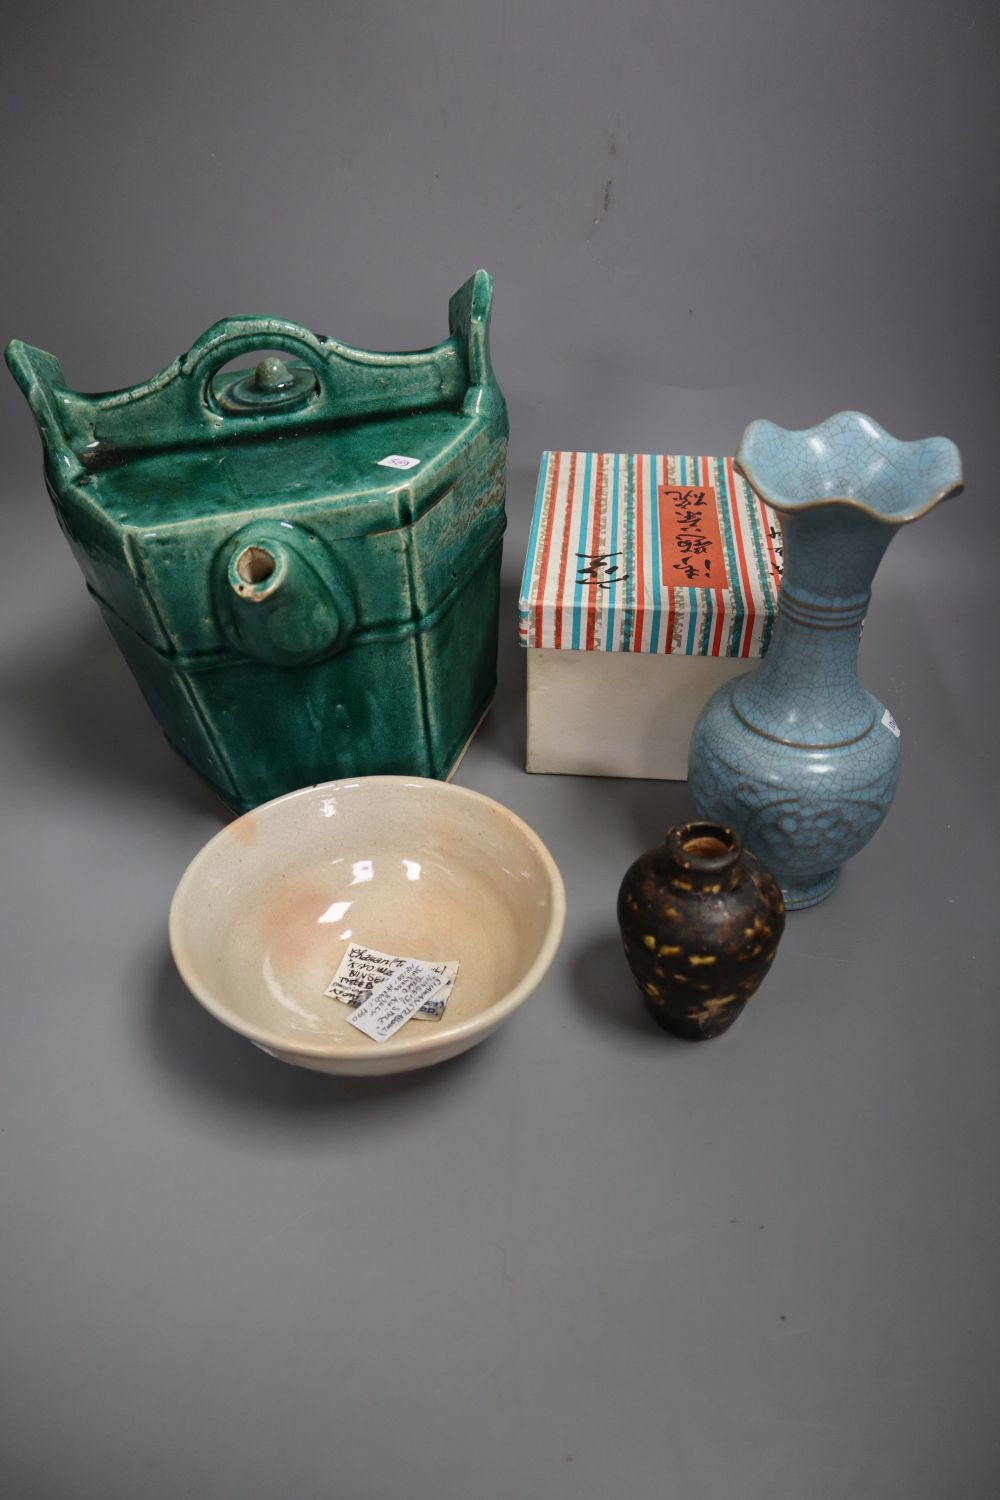 A Chinese green glazed teapot, 20.5cm high, a Cizhou type vase, a turquoise glazed vase and a Japanese tea bowl